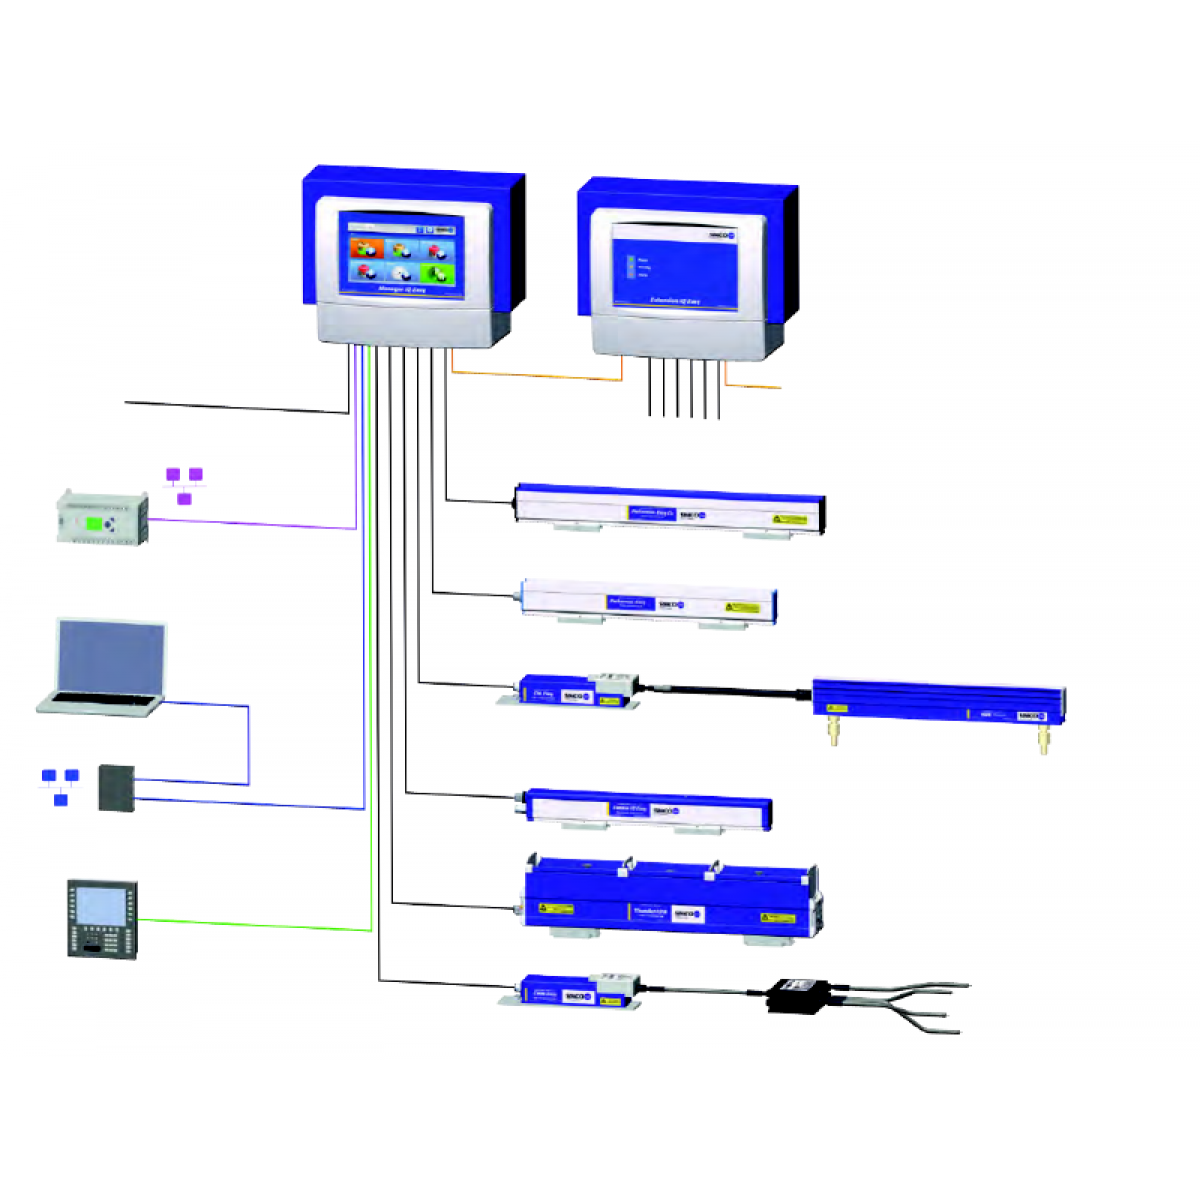 IQ Platform - Control and monitoring of ionizers in the manufacturing process